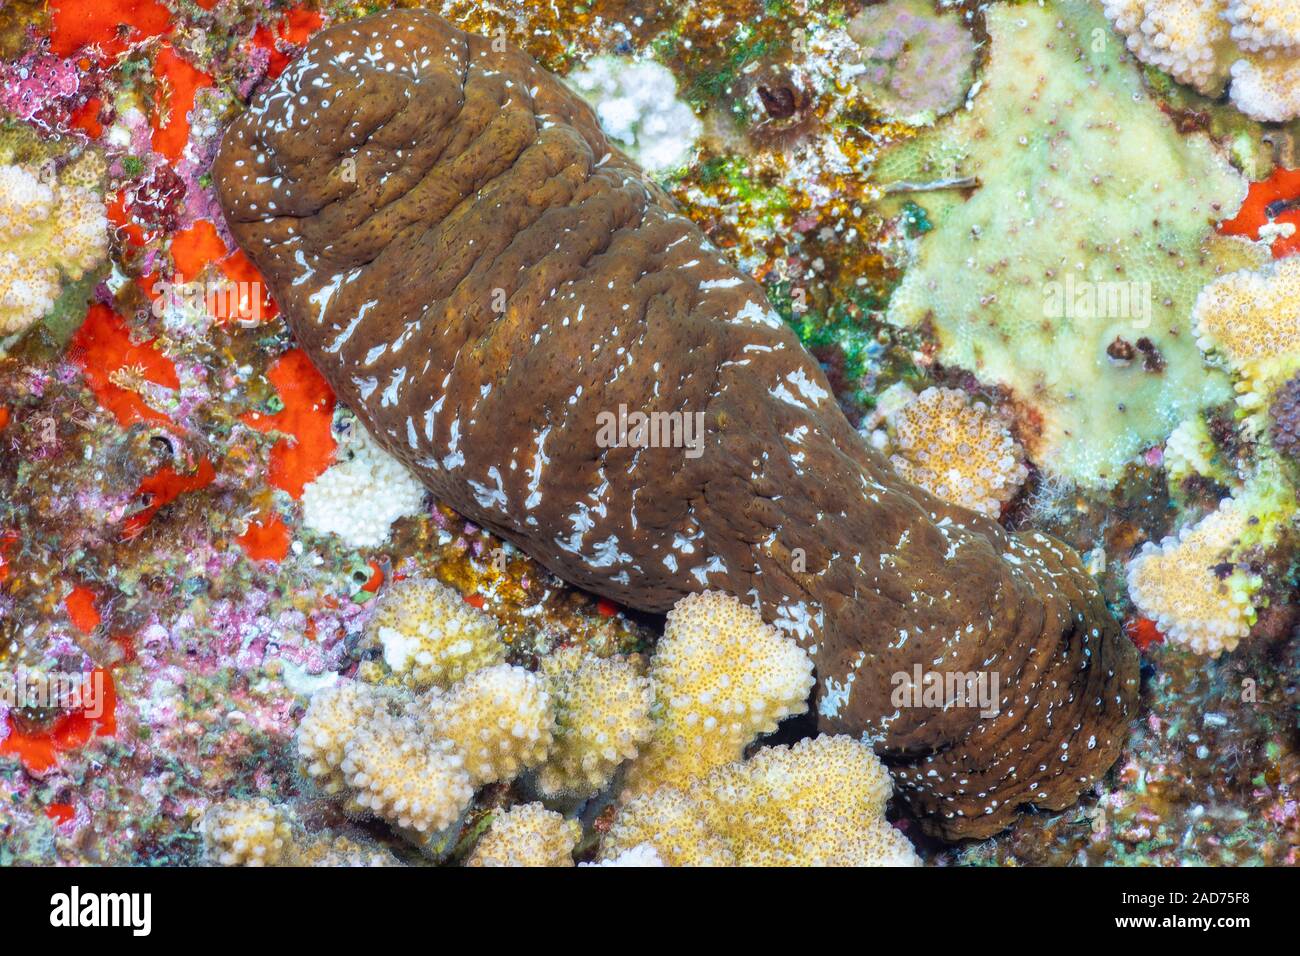 The white spotted sea cucumber, Actinopyga mauritiana, reaches about 8 inches in length, Hawaii. Stock Photo